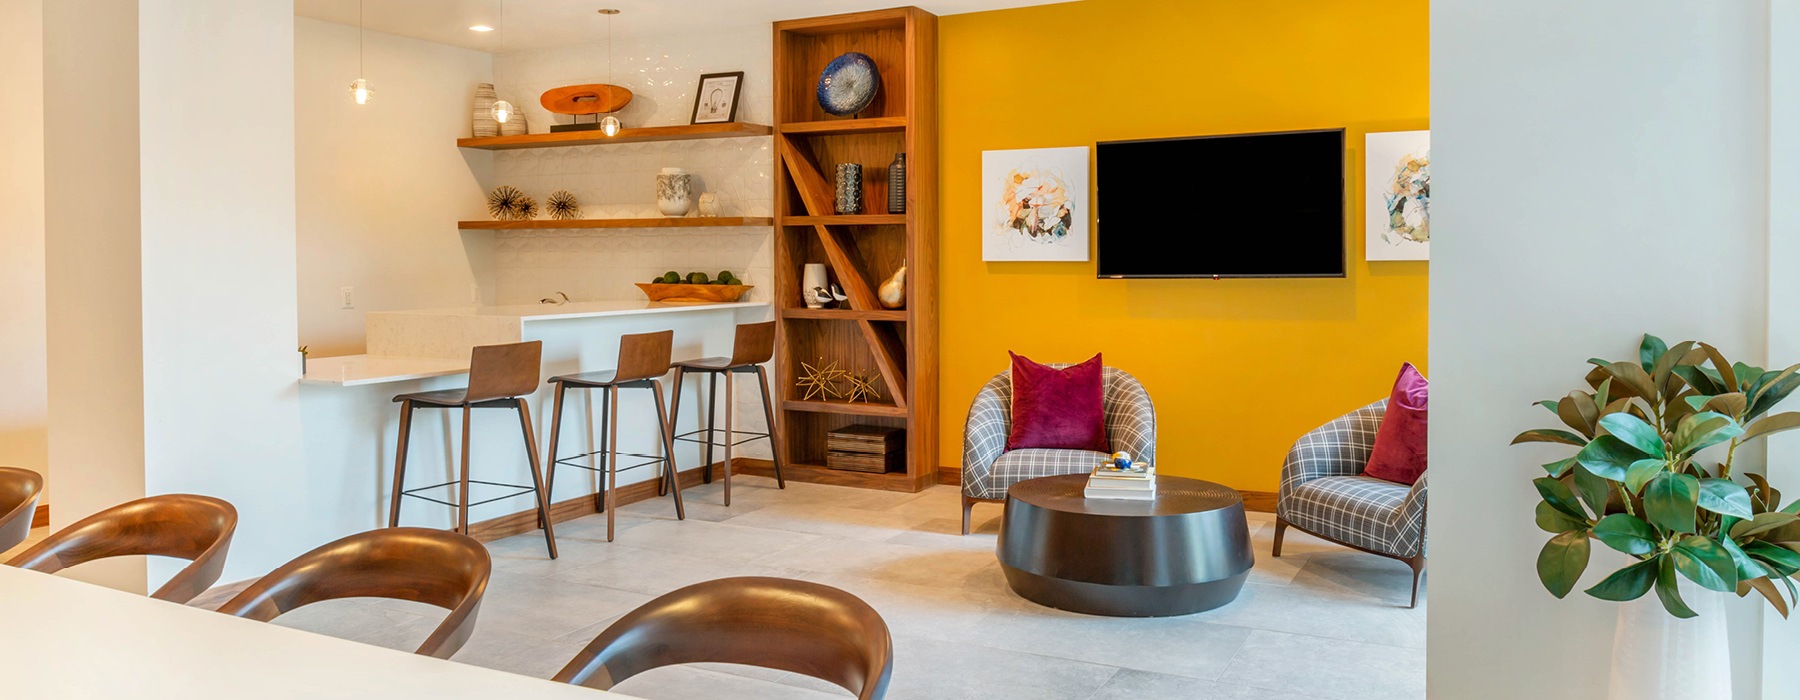 bright clubroom with social seating areas and kitchen